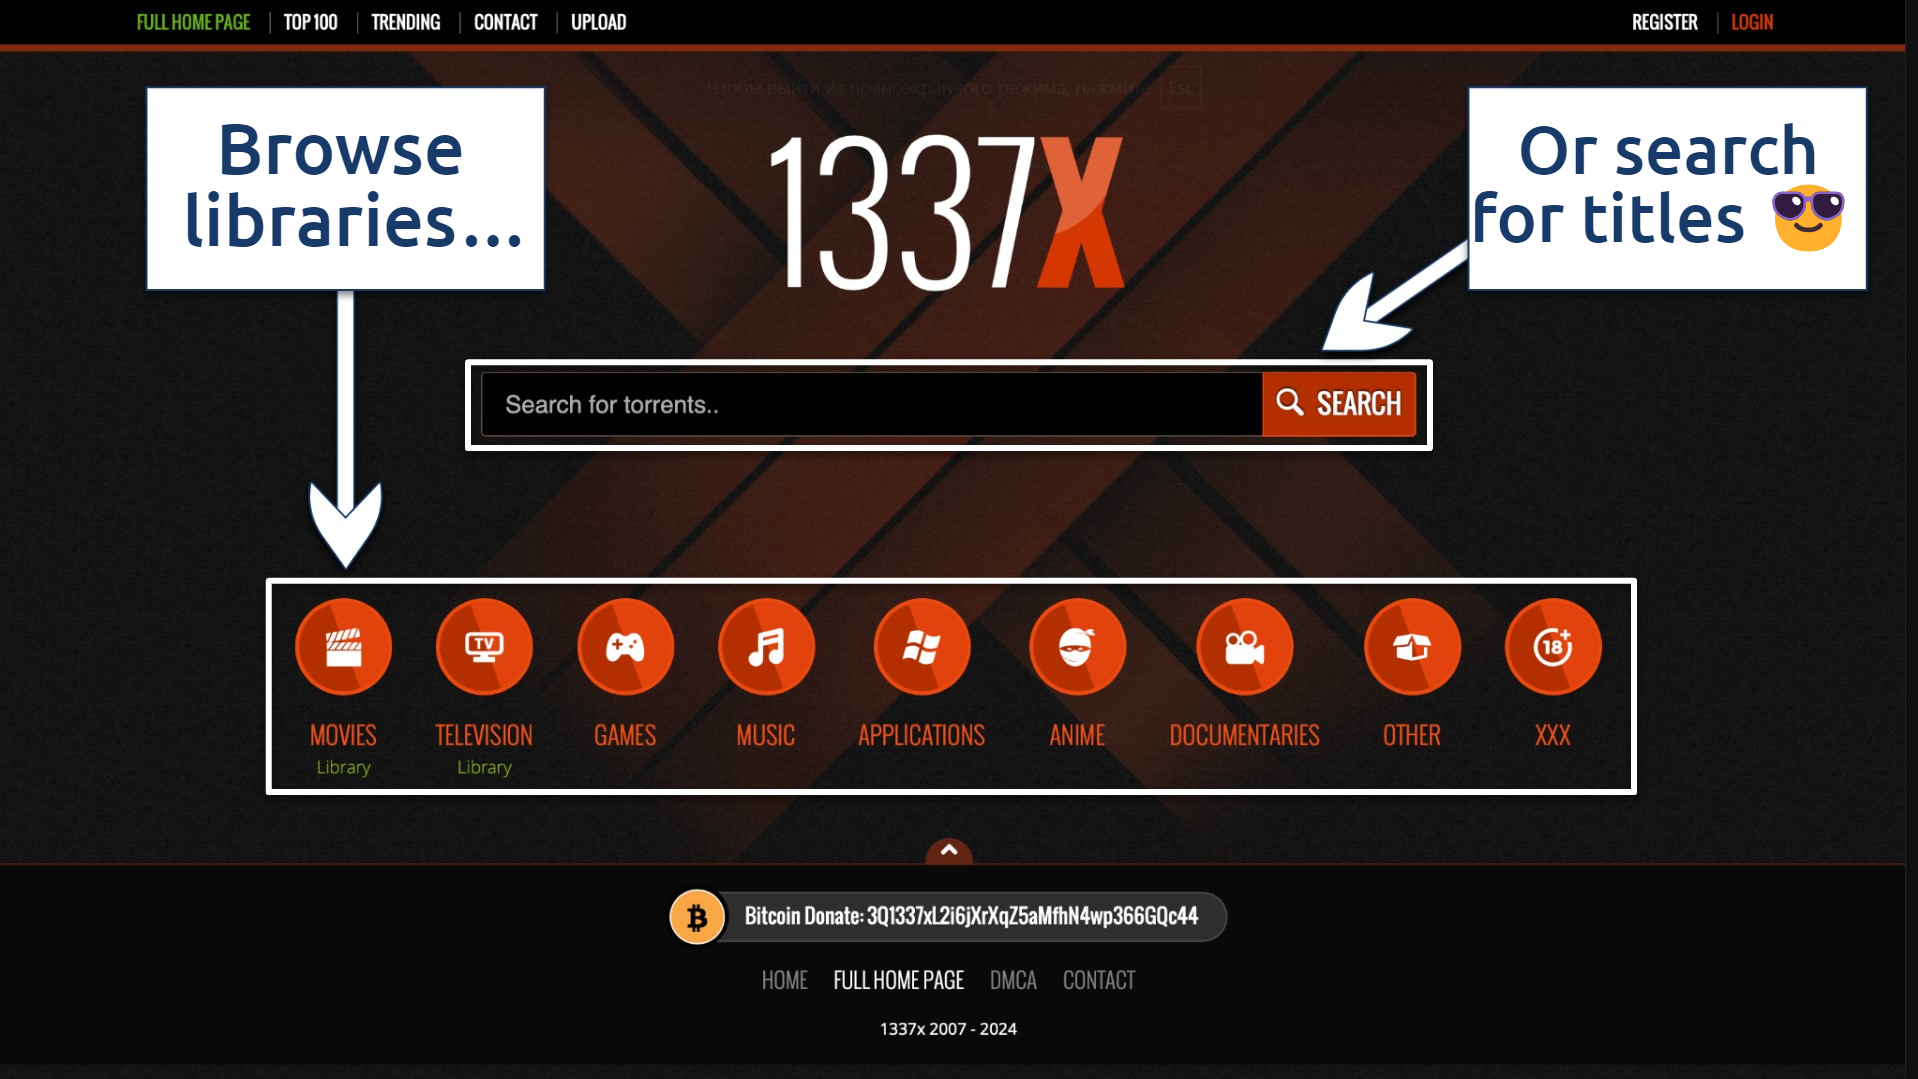 Screenshot of the 1337x home page